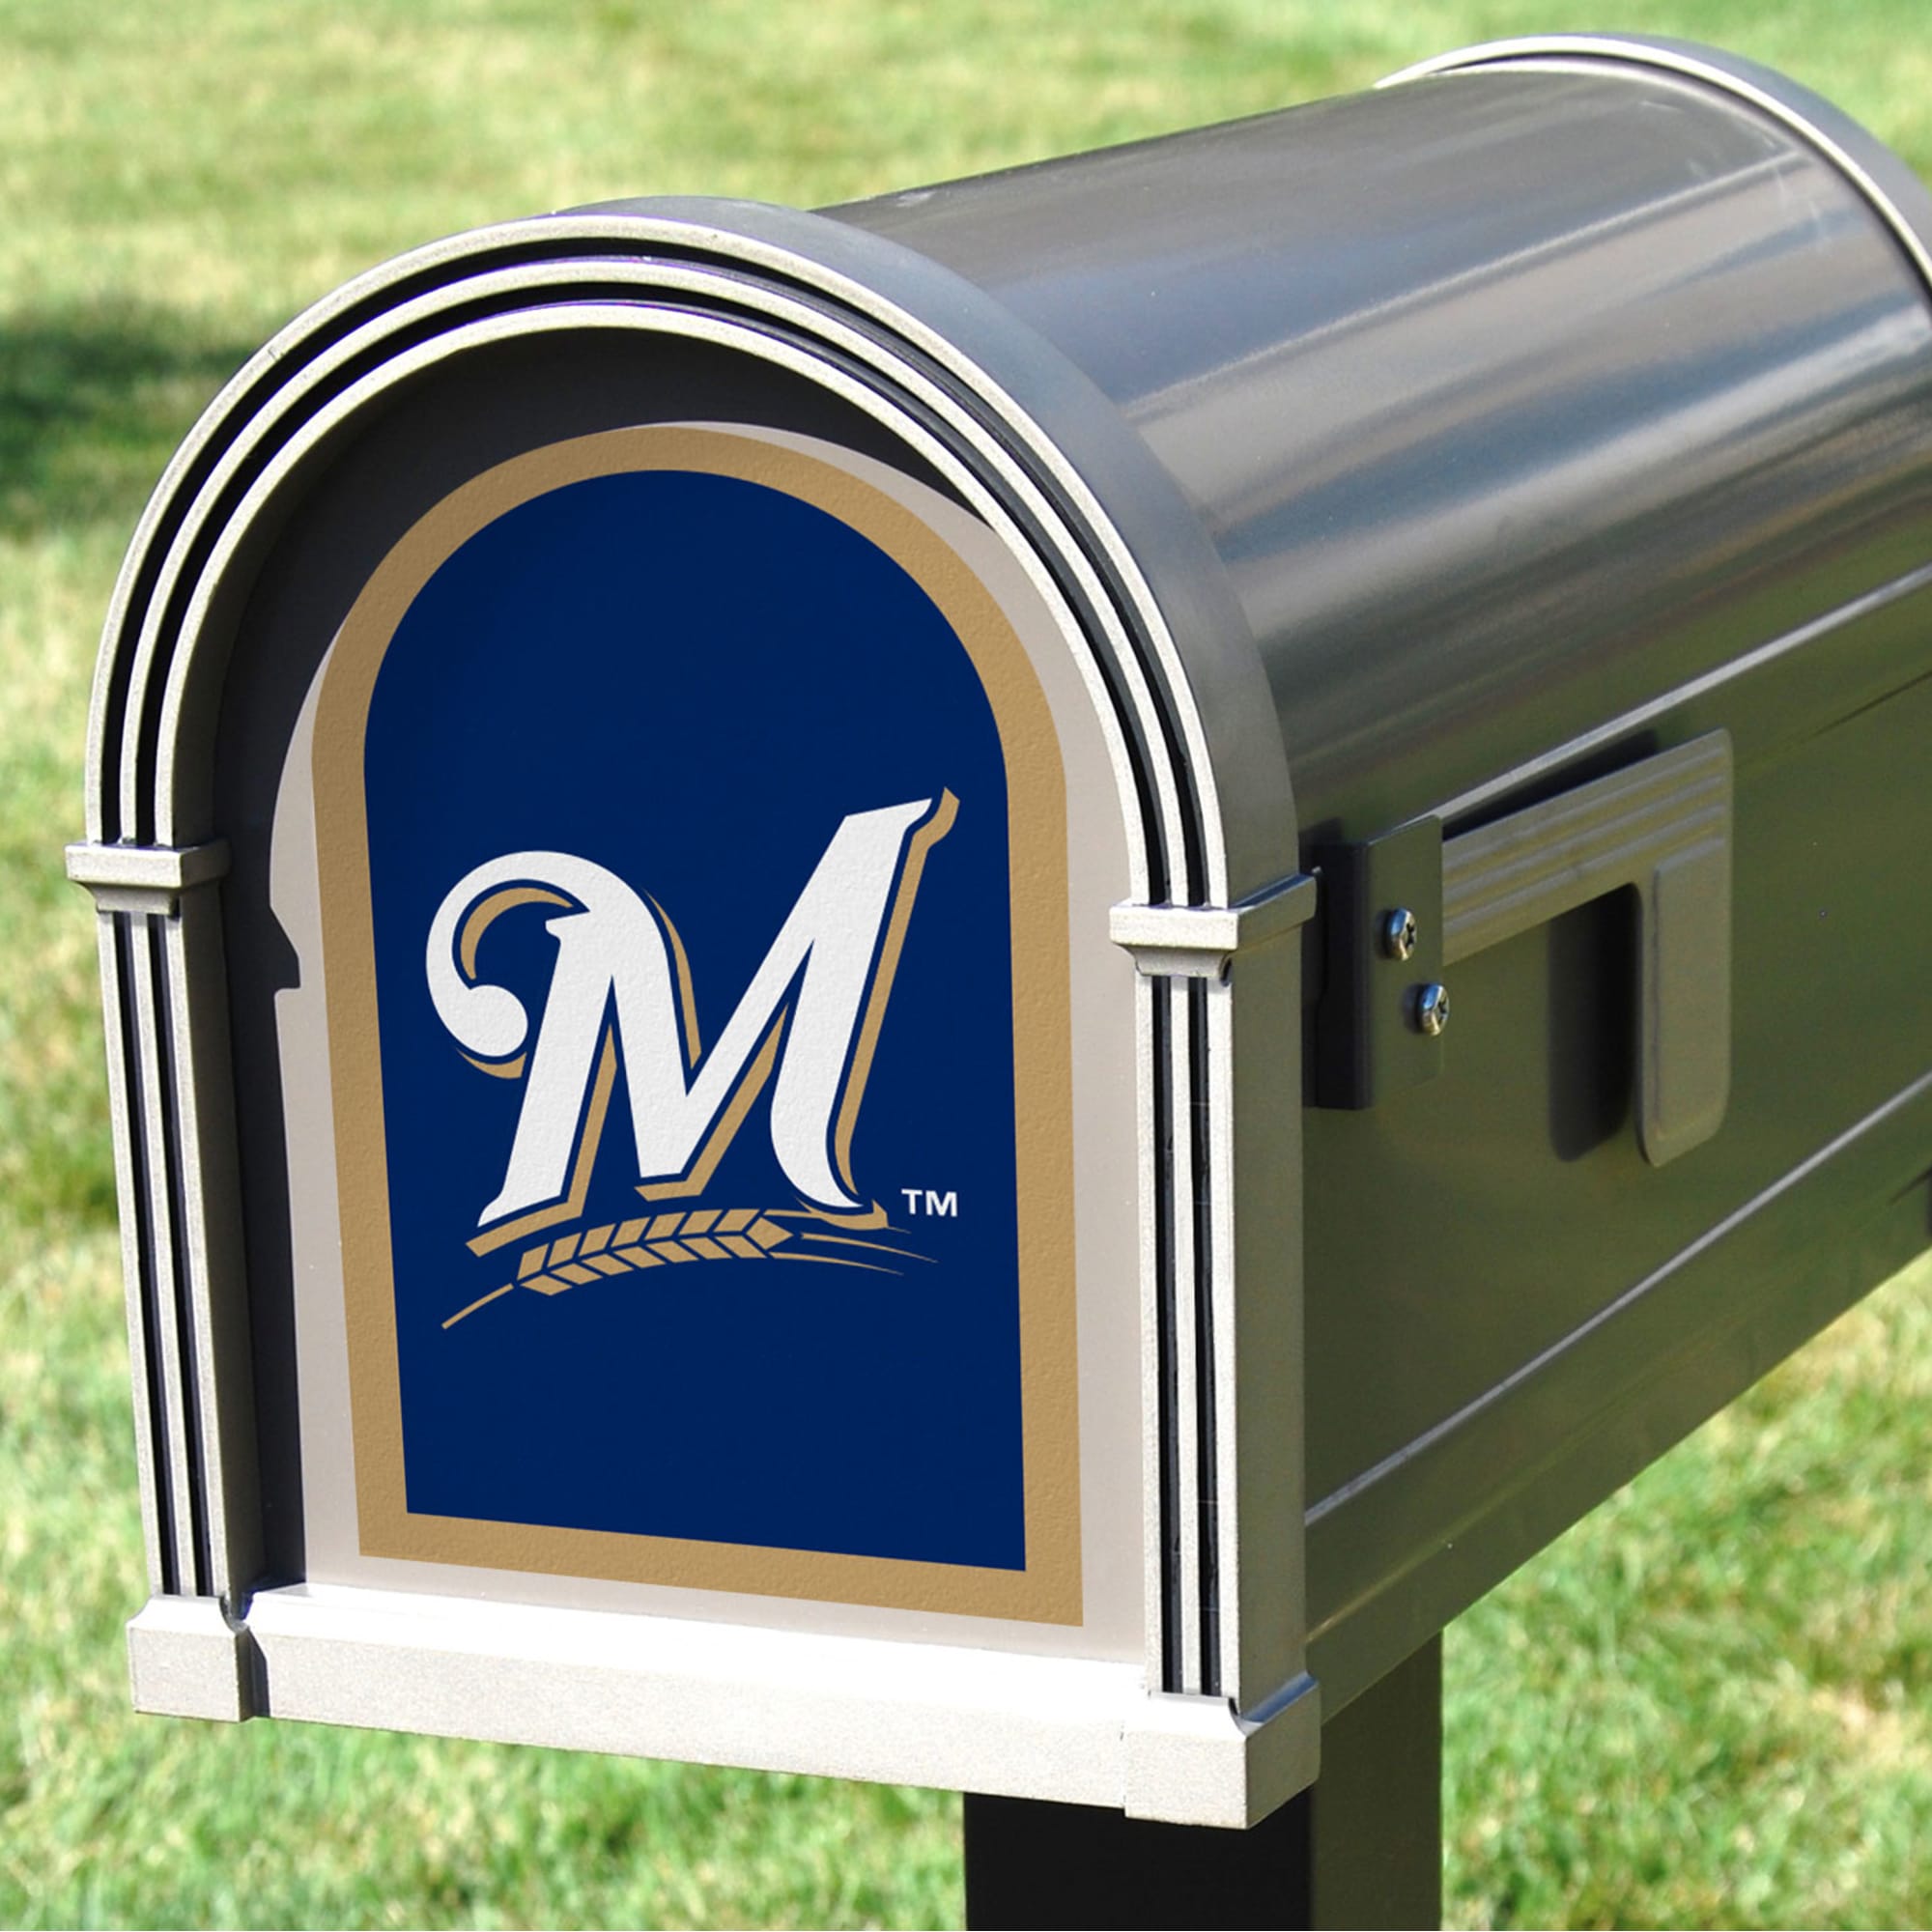 Milwaukee Brewers: Mailbox Logo - Officially Licensed MLB Outdoor Graphic 5.0"W x 8.0"H by Fathead | Wood/Aluminum